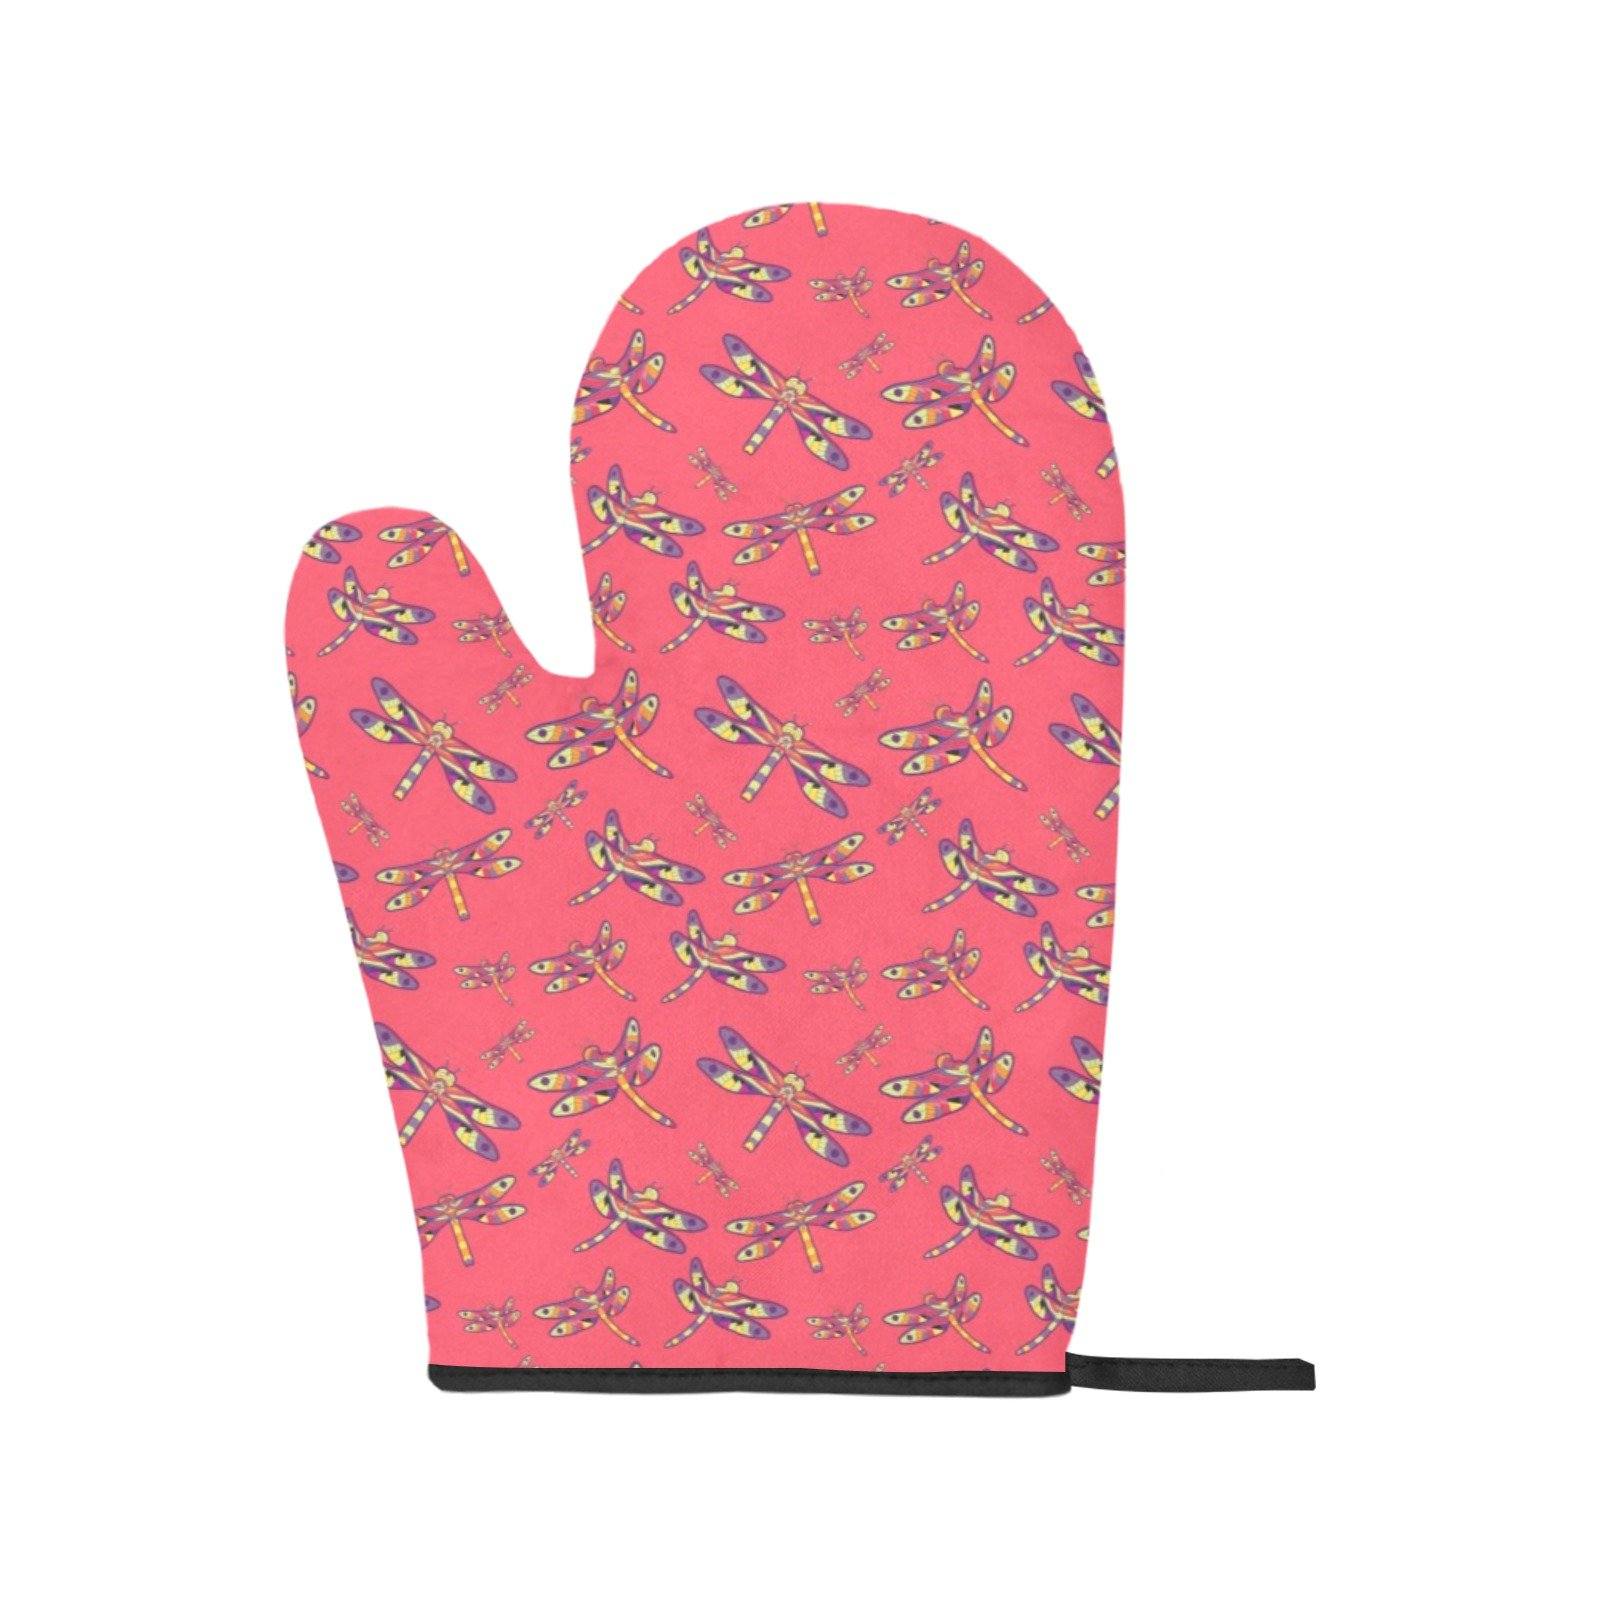 Heat Resistant Pot Holders Bear Paw Oven Mitts Silicone Oven Mitt